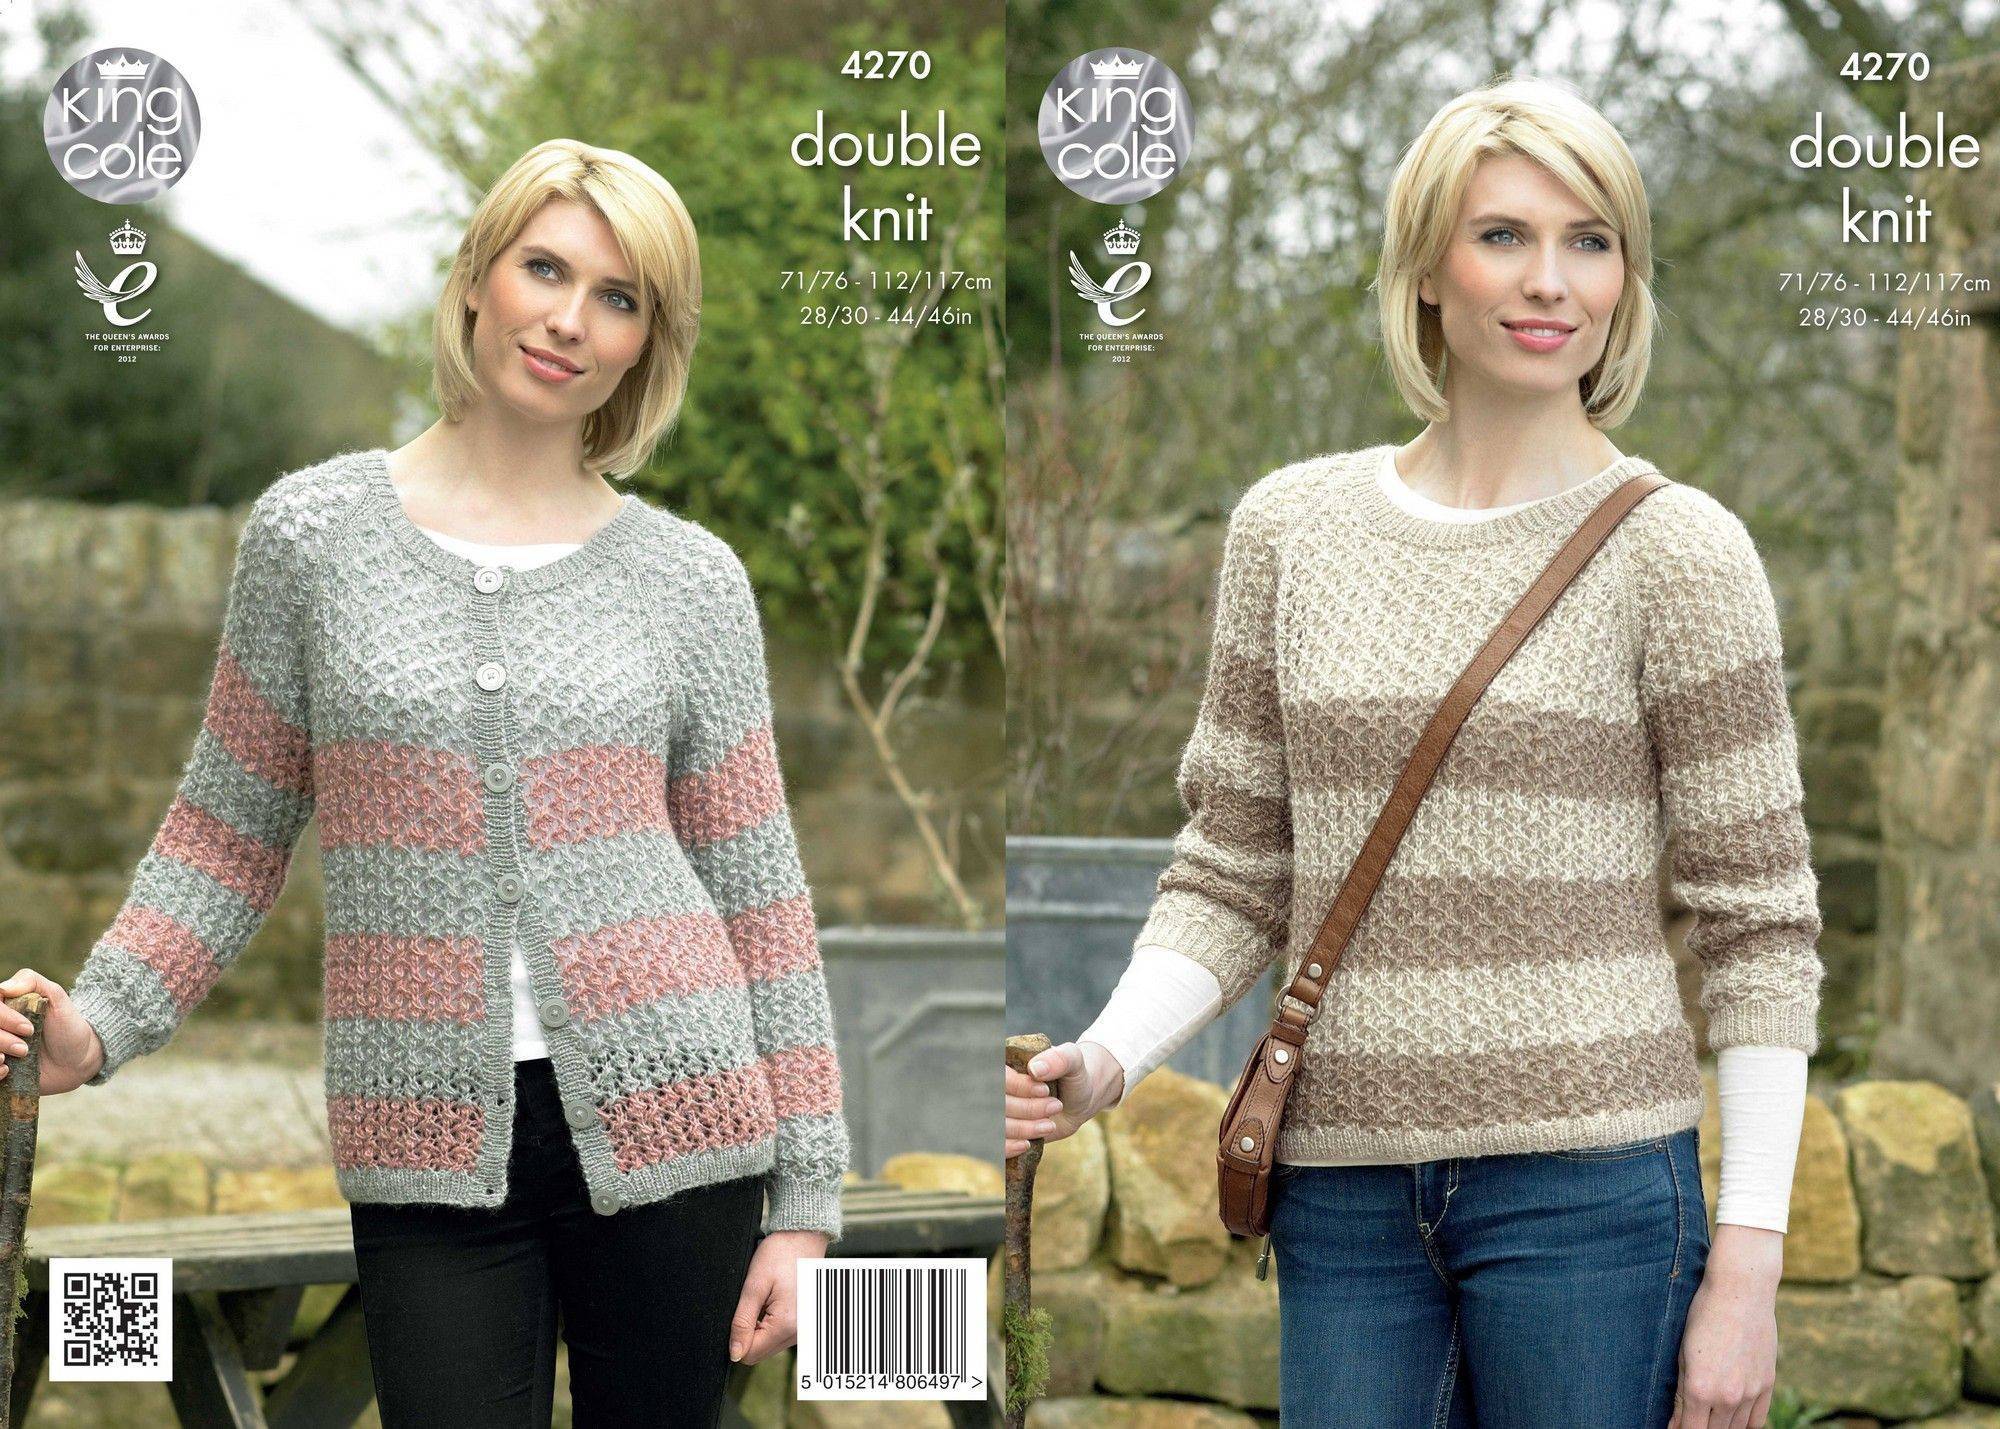 Sweater and Cardigan in Panache DK (4270) | The Knitting Network